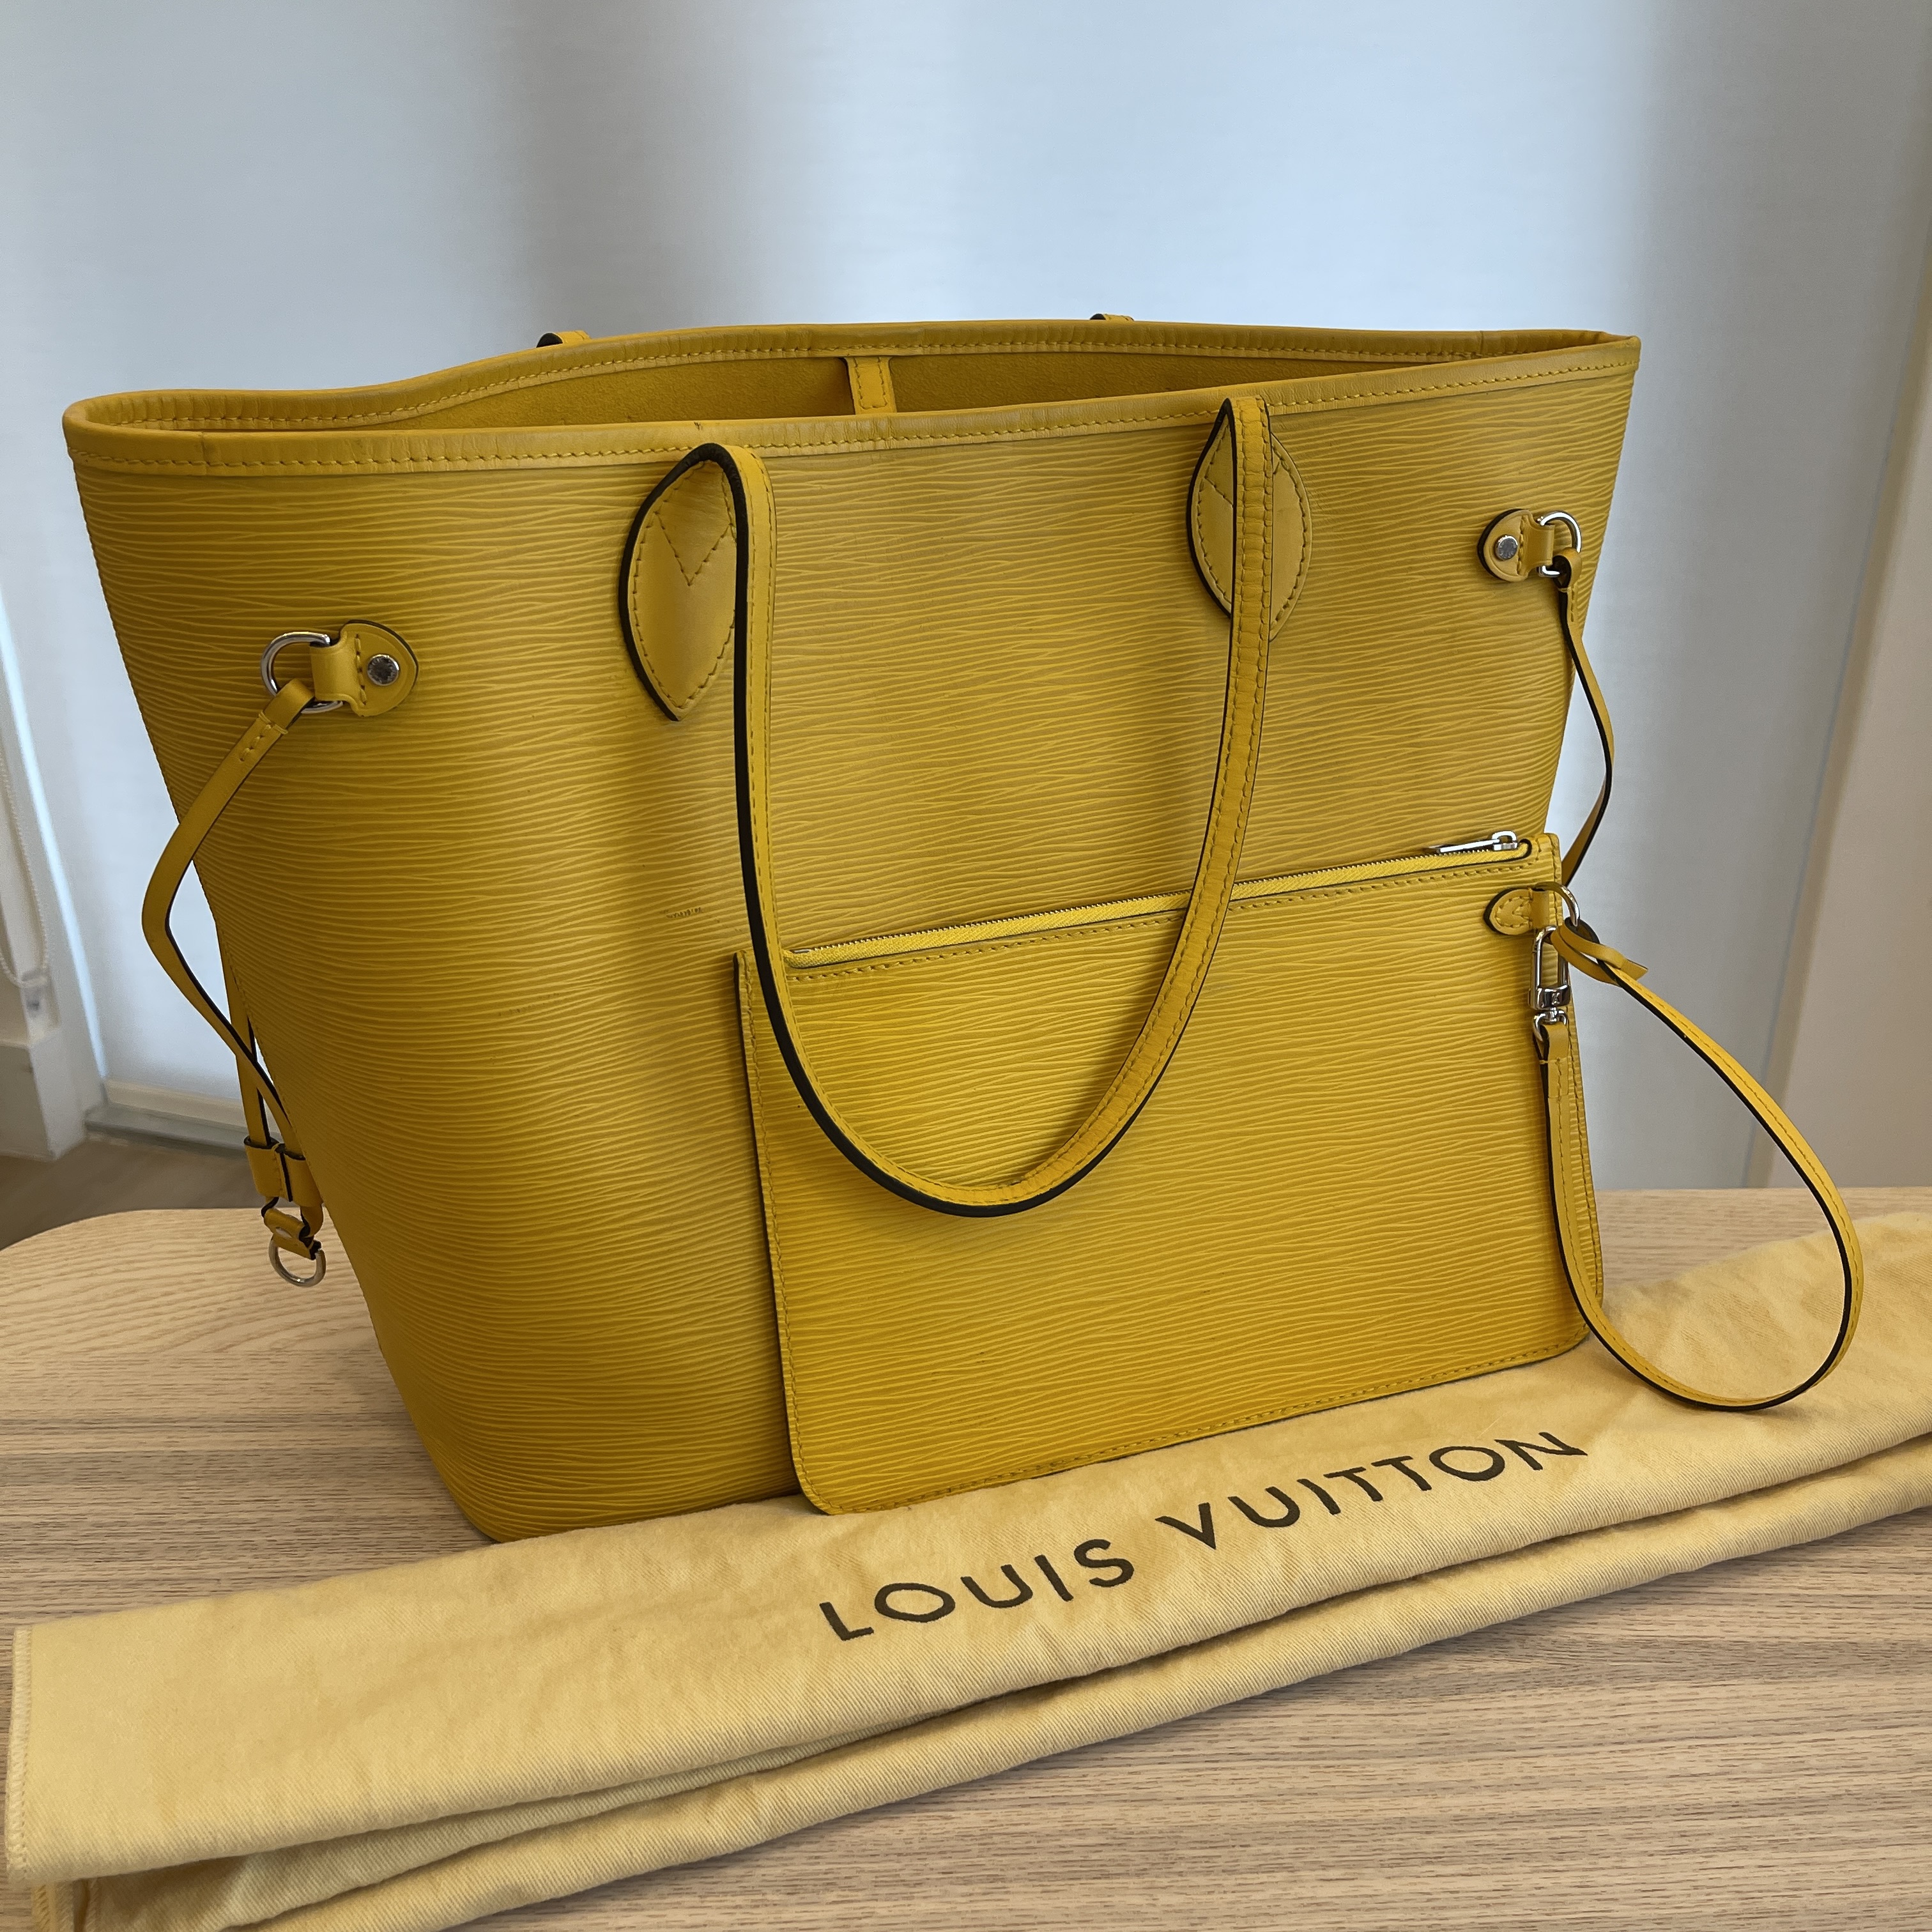 Preloved Louis Vuitton Neverfull MM Yellow Epi Leather Tote Bag